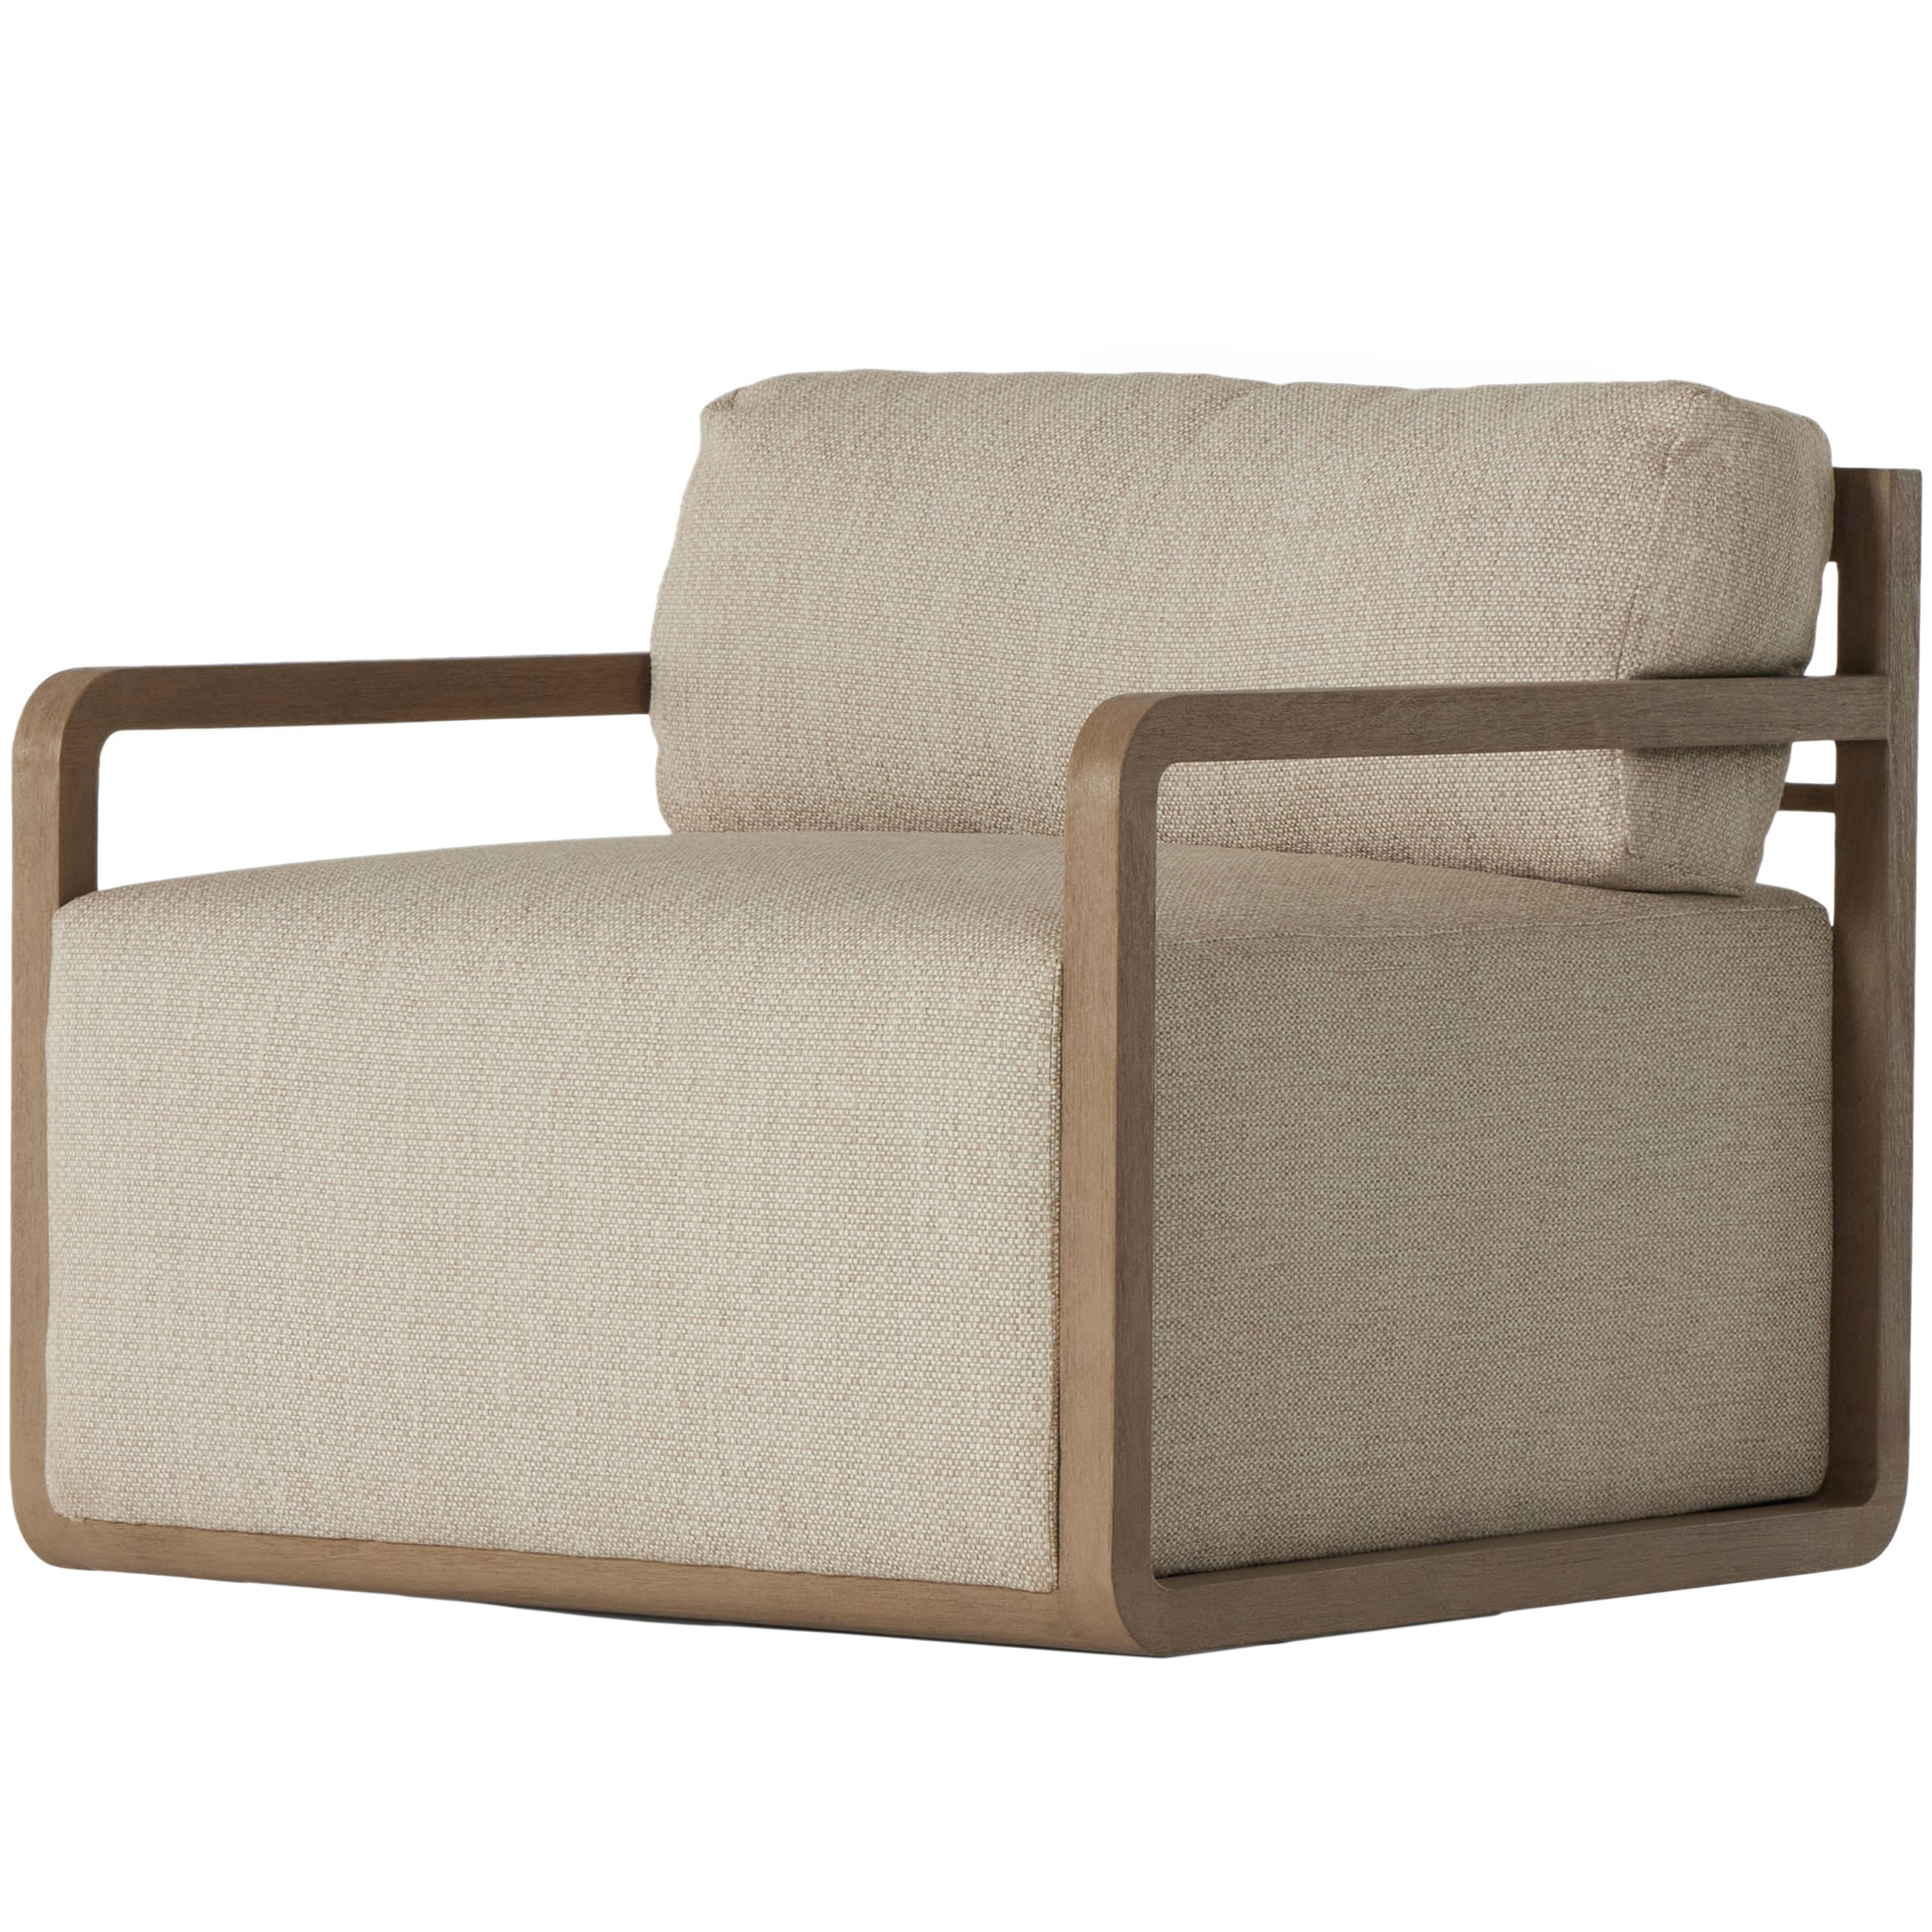 Acadia Outdoor Swivel Chair, Washed Brown Teak/Sand